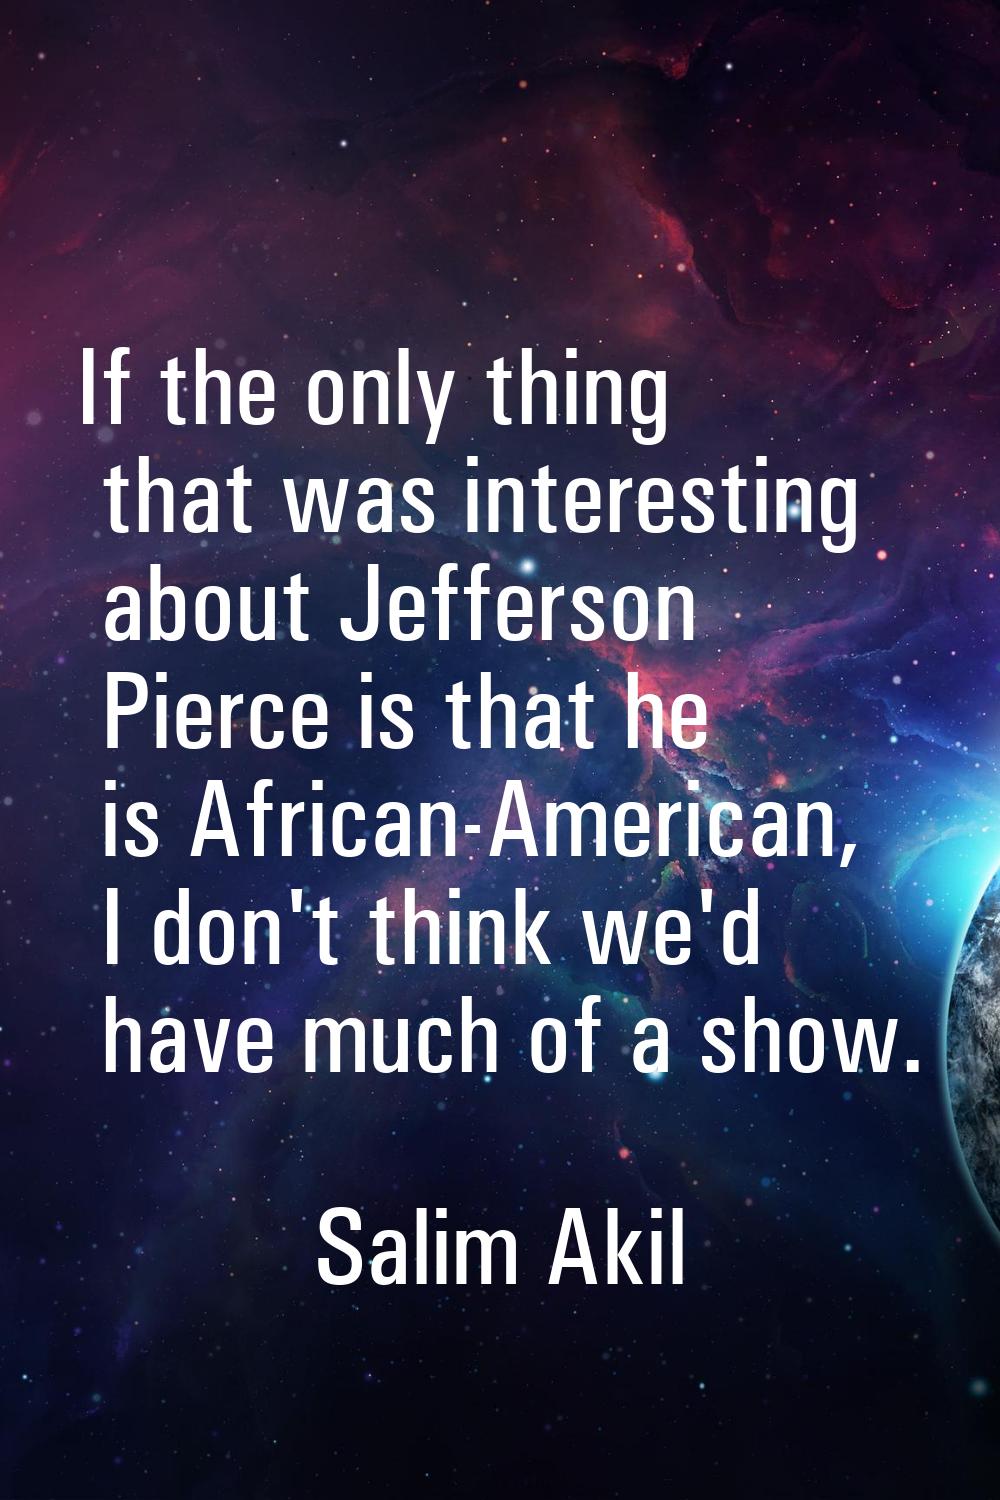 If the only thing that was interesting about Jefferson Pierce is that he is African-American, I don